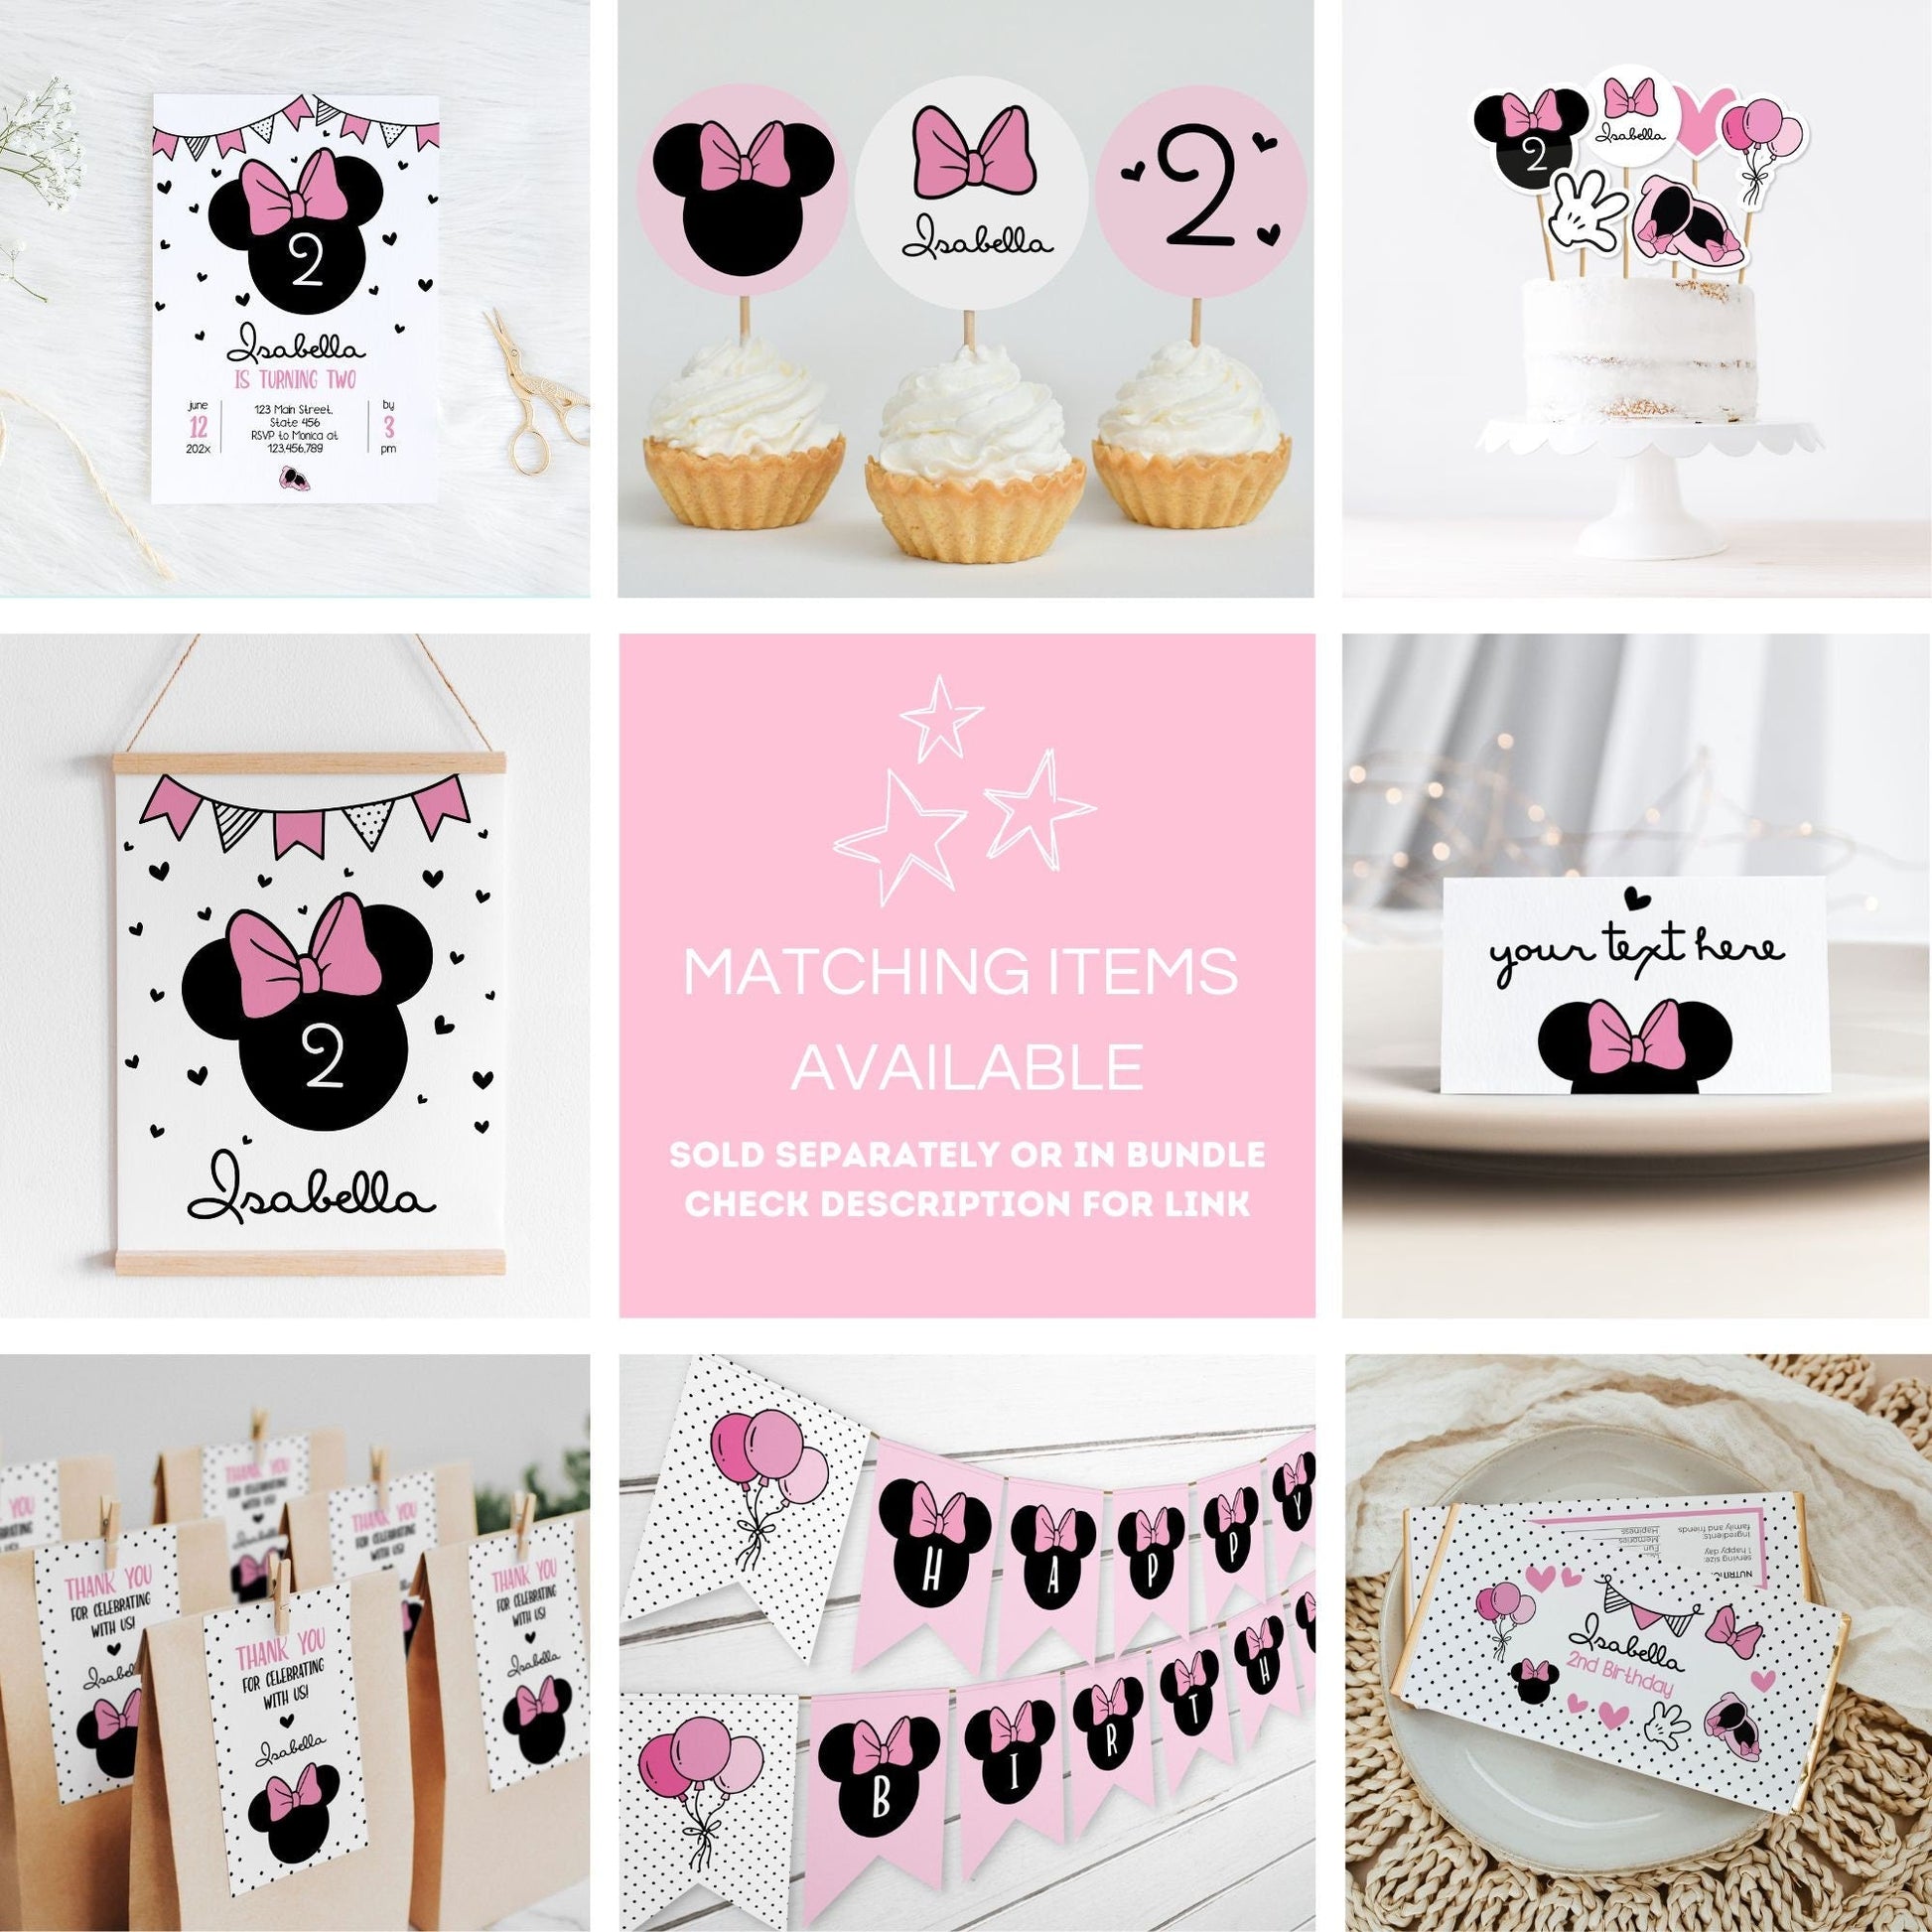 Minnie Mouse – Cake Topper – various options